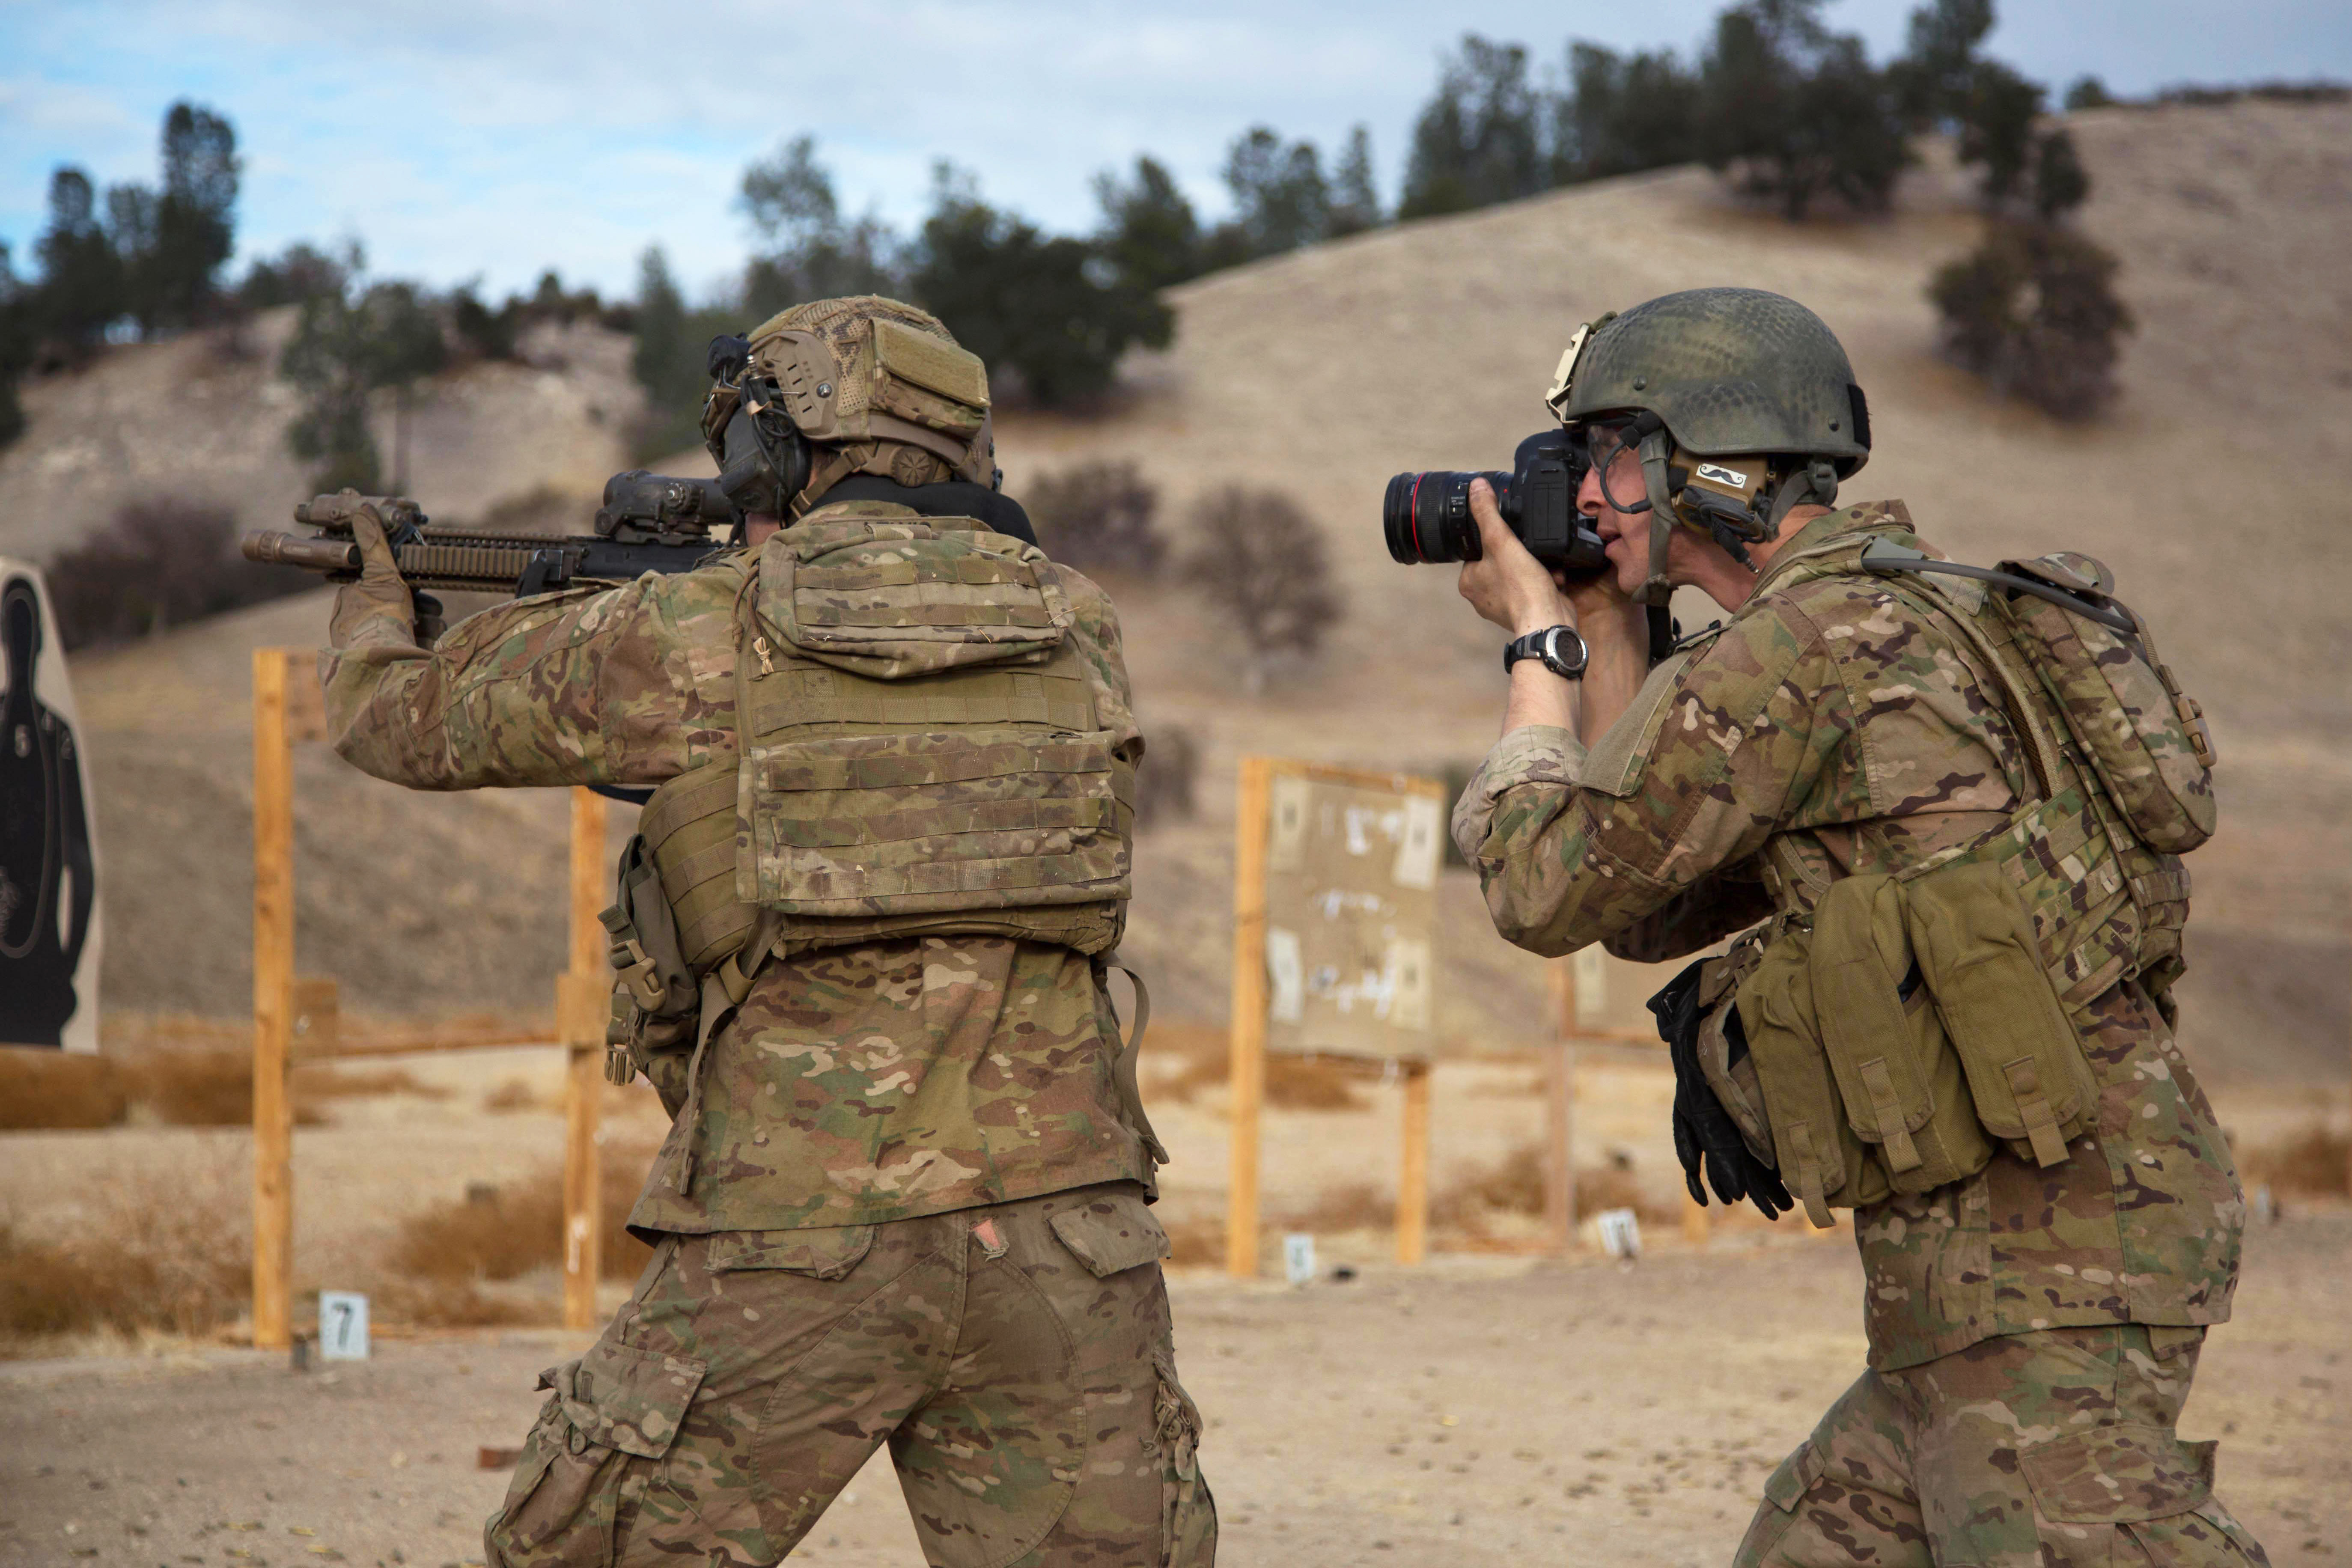 Army Spc. Steven Hitchcock, right, takes photographs of Army Rangers